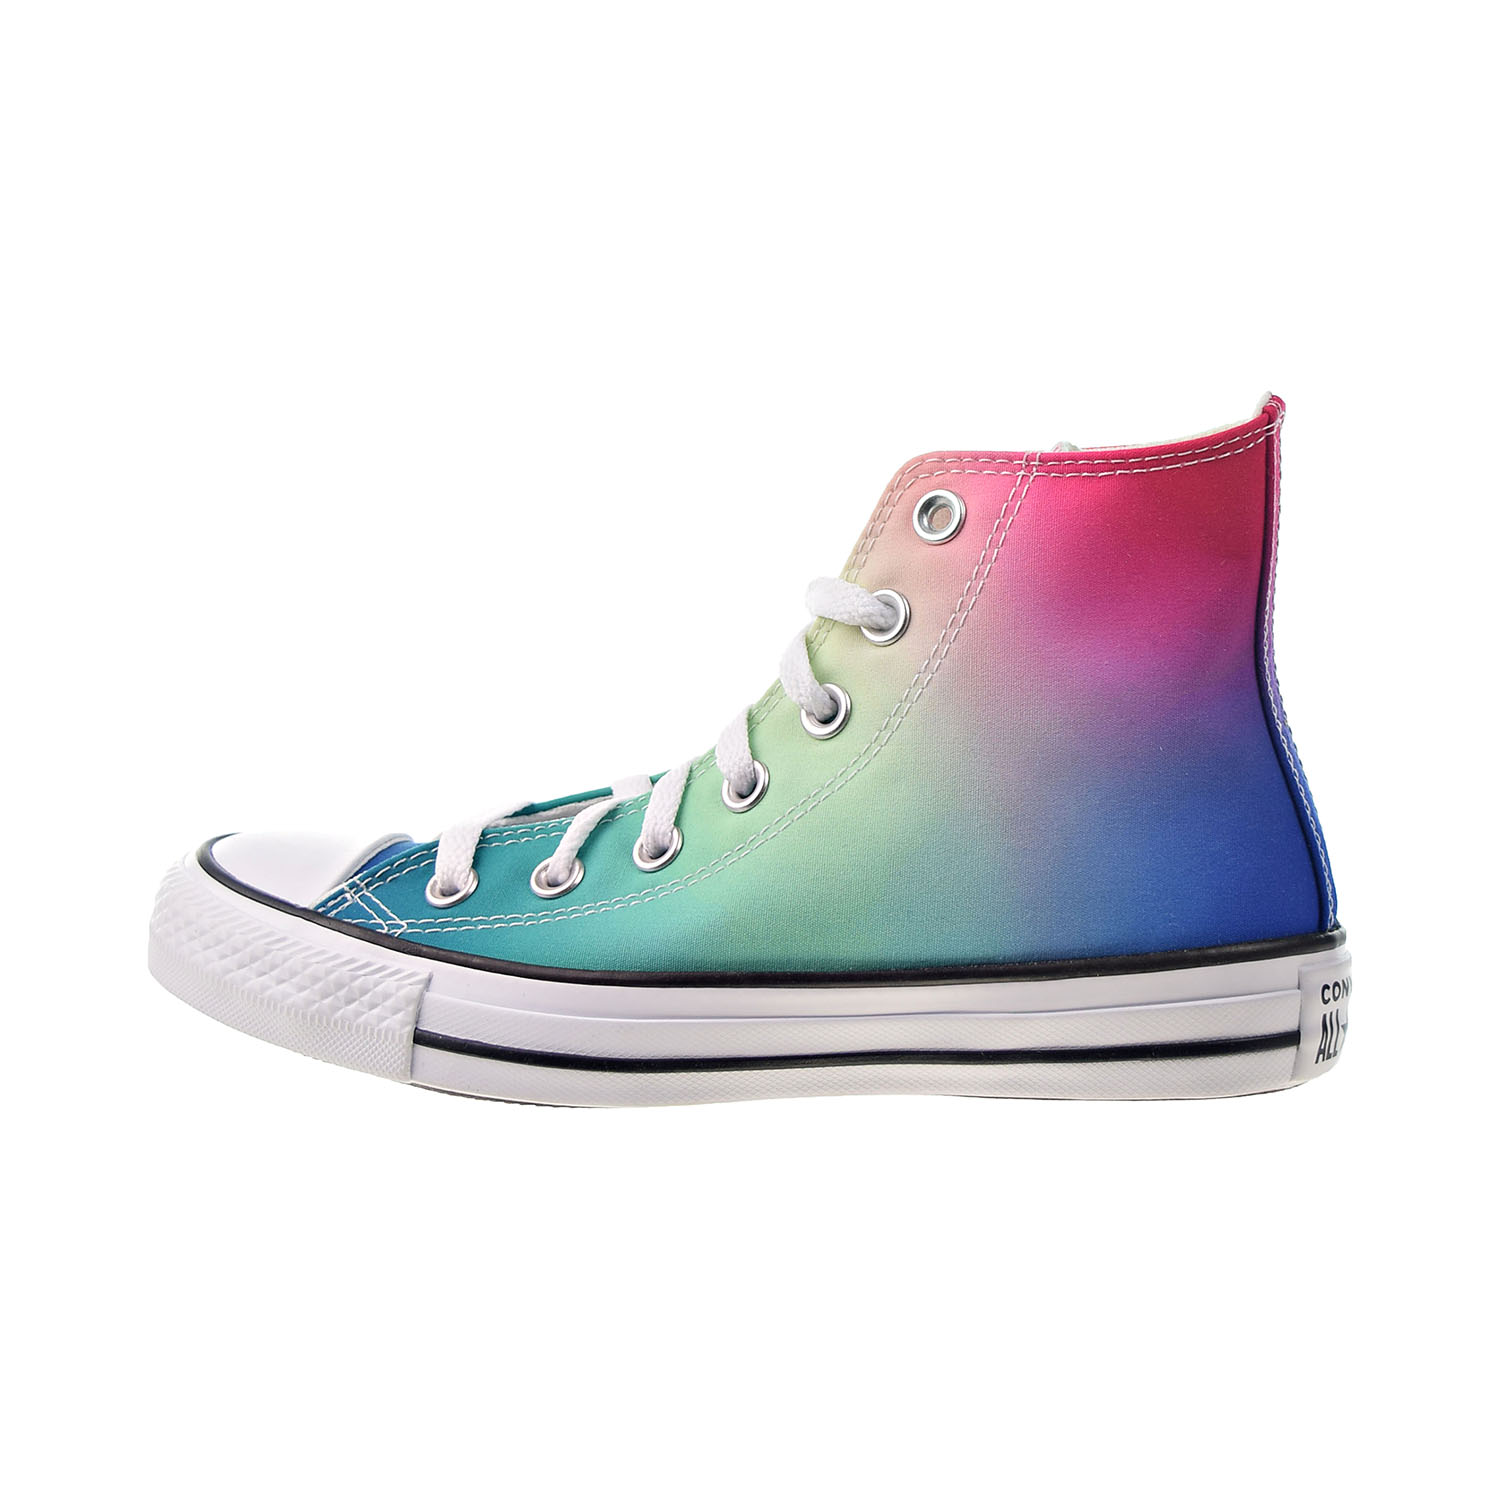 Converse Chuck Taylor All Star Hi "Psychadelic Hoops" Men's Shoes White 167592c - image 4 of 6